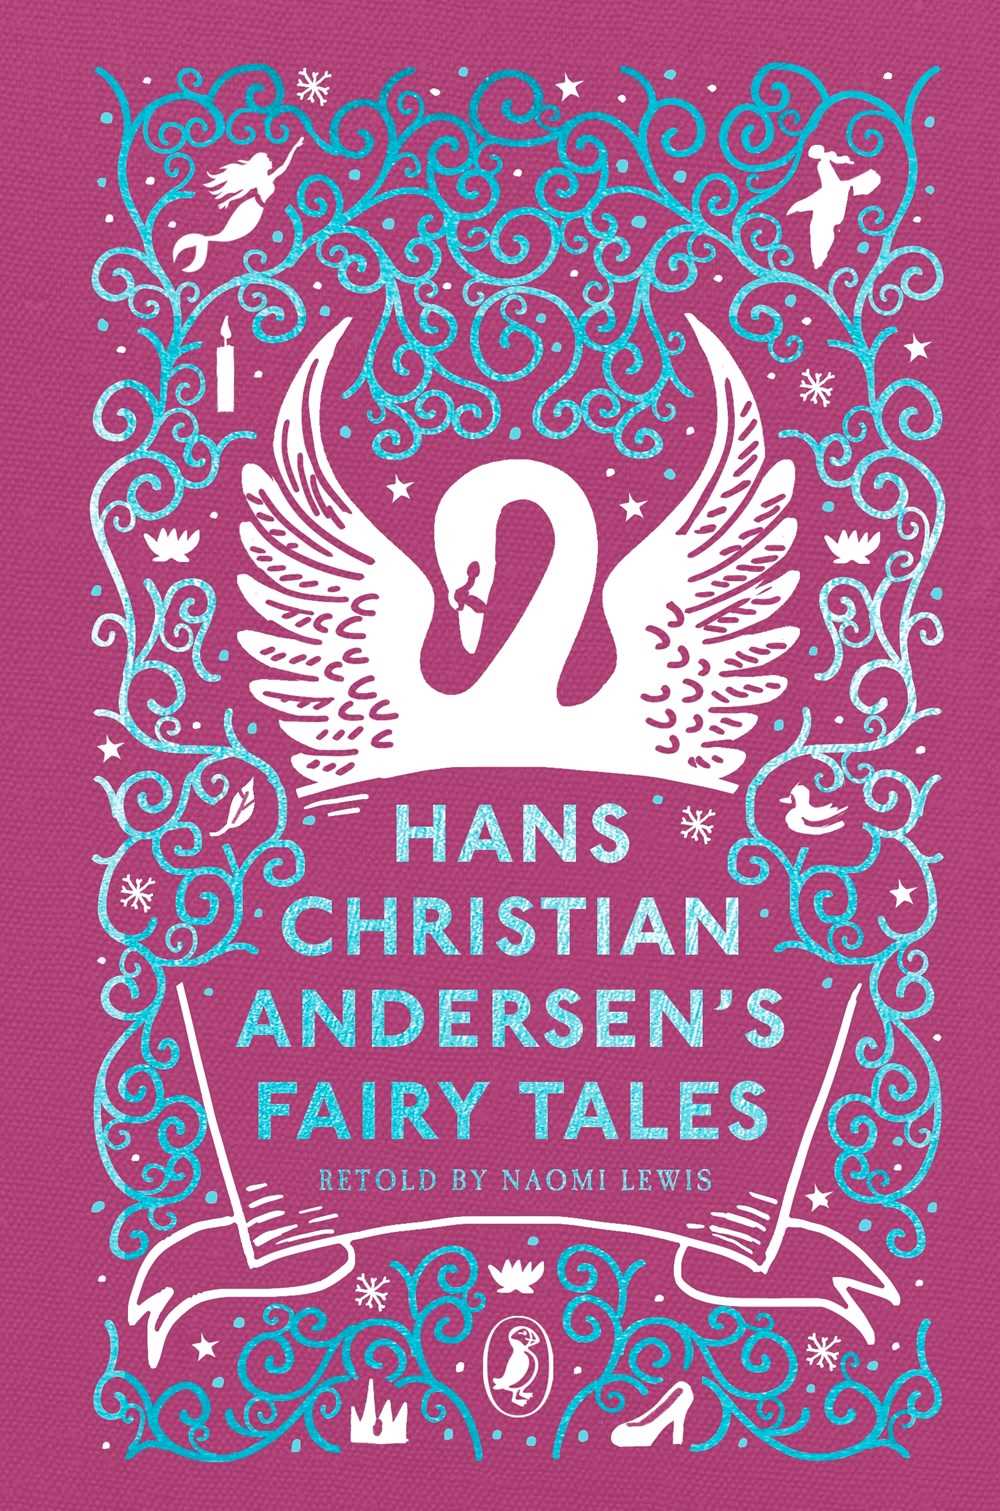 Hans Christian Andersen's Fairy Tales (Puffin Clothbound Classics)